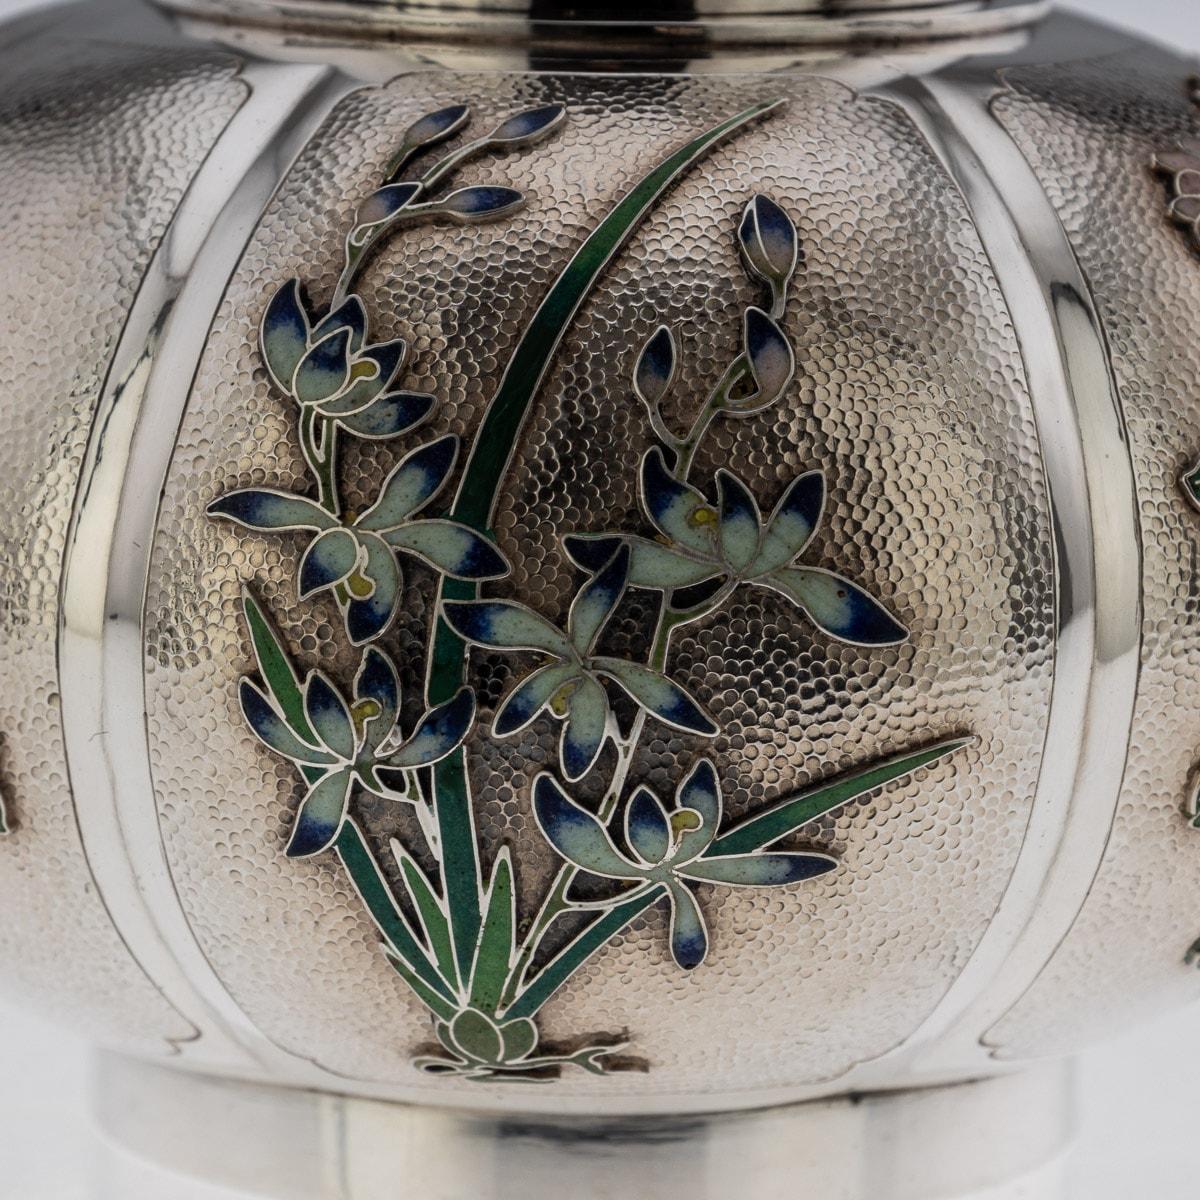 20th Century Chinese Export Solid Silver & Enamel Tea Caddy, Luen Wo, c.1900 7